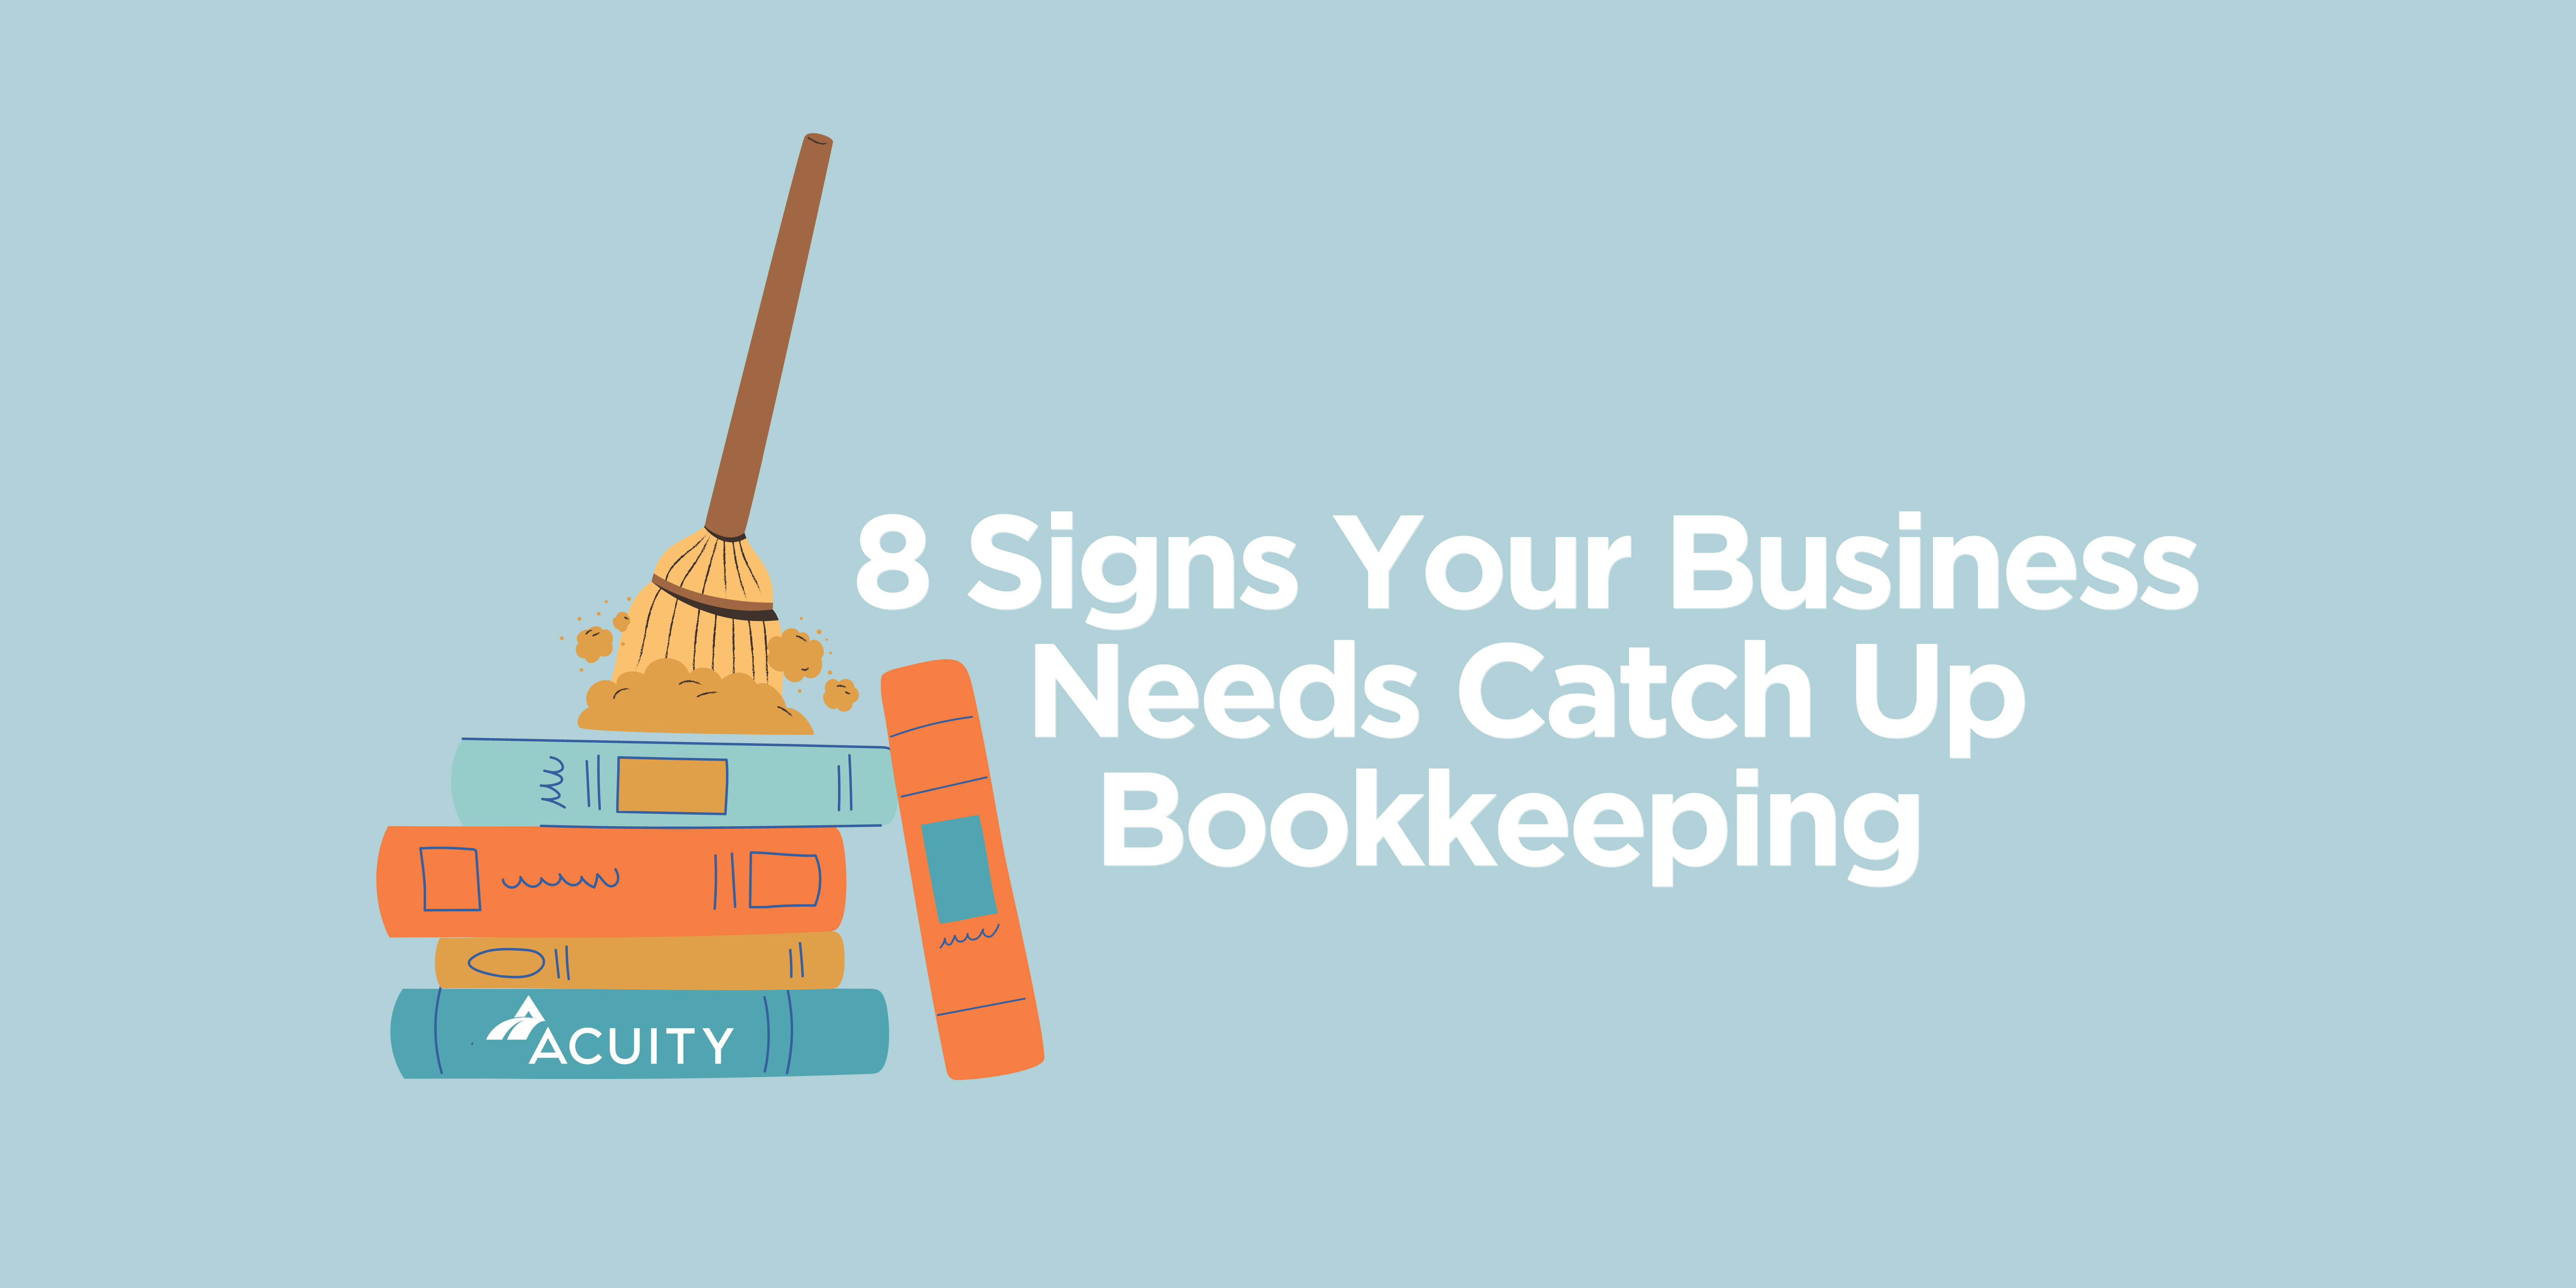 8 Signs Your Business Needs Catch Up Bookkeeping | An Entrepreneur’s Guide To Bookkeeping, Tax, & How They Interact